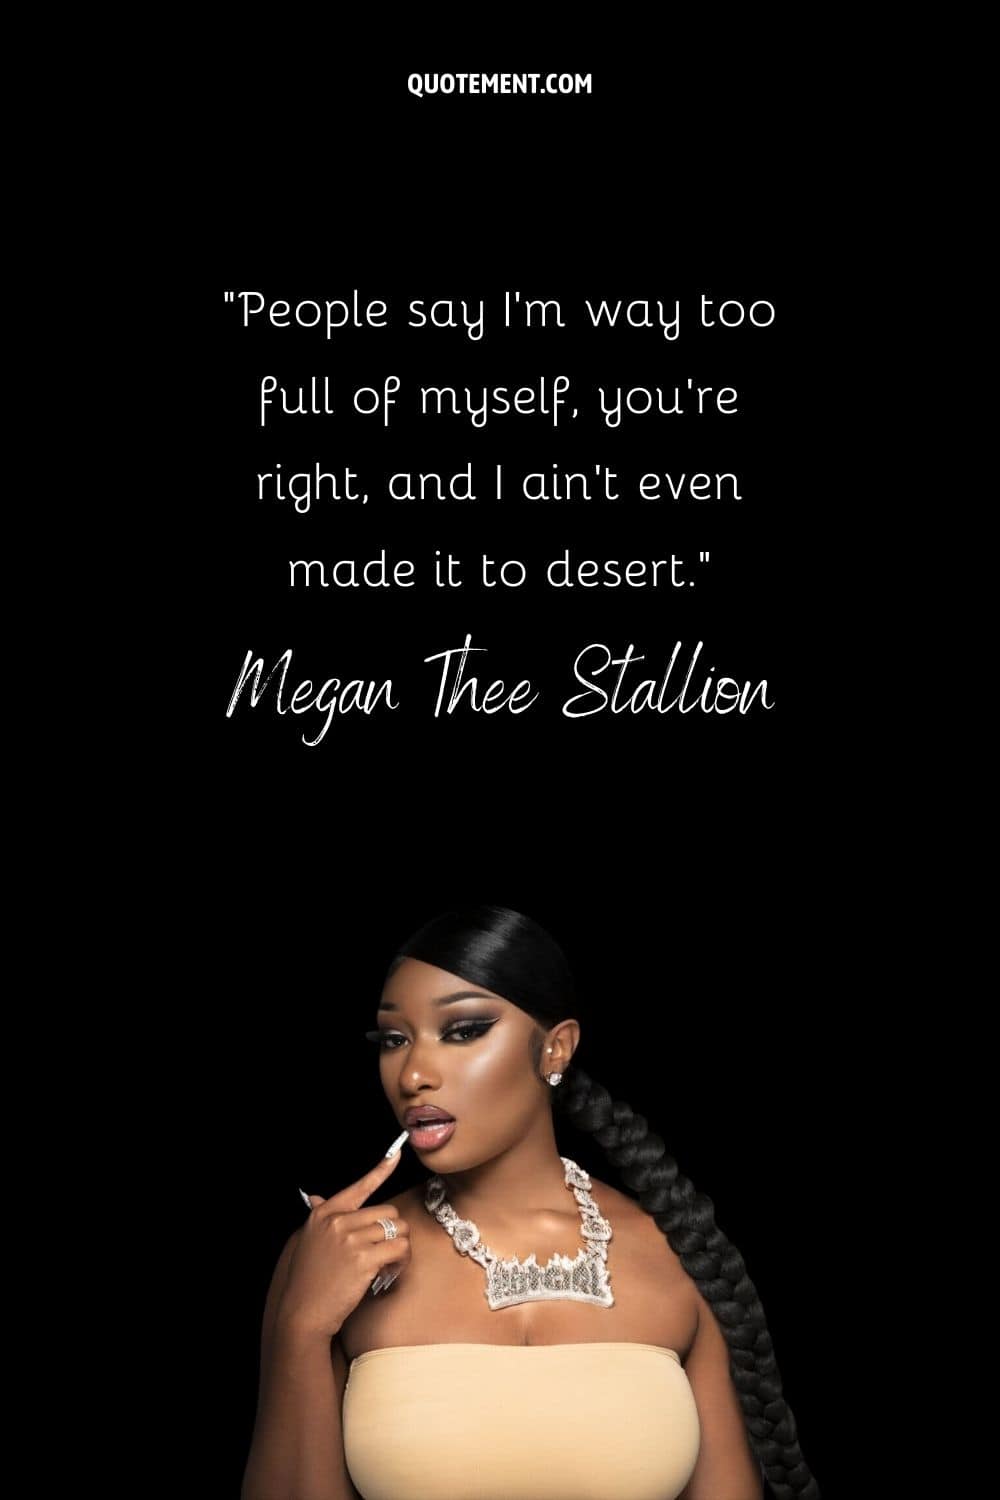 “People say I'm way too full of myself, you're right, and I ain't even made it to desert.” — Megan Thee Stallion